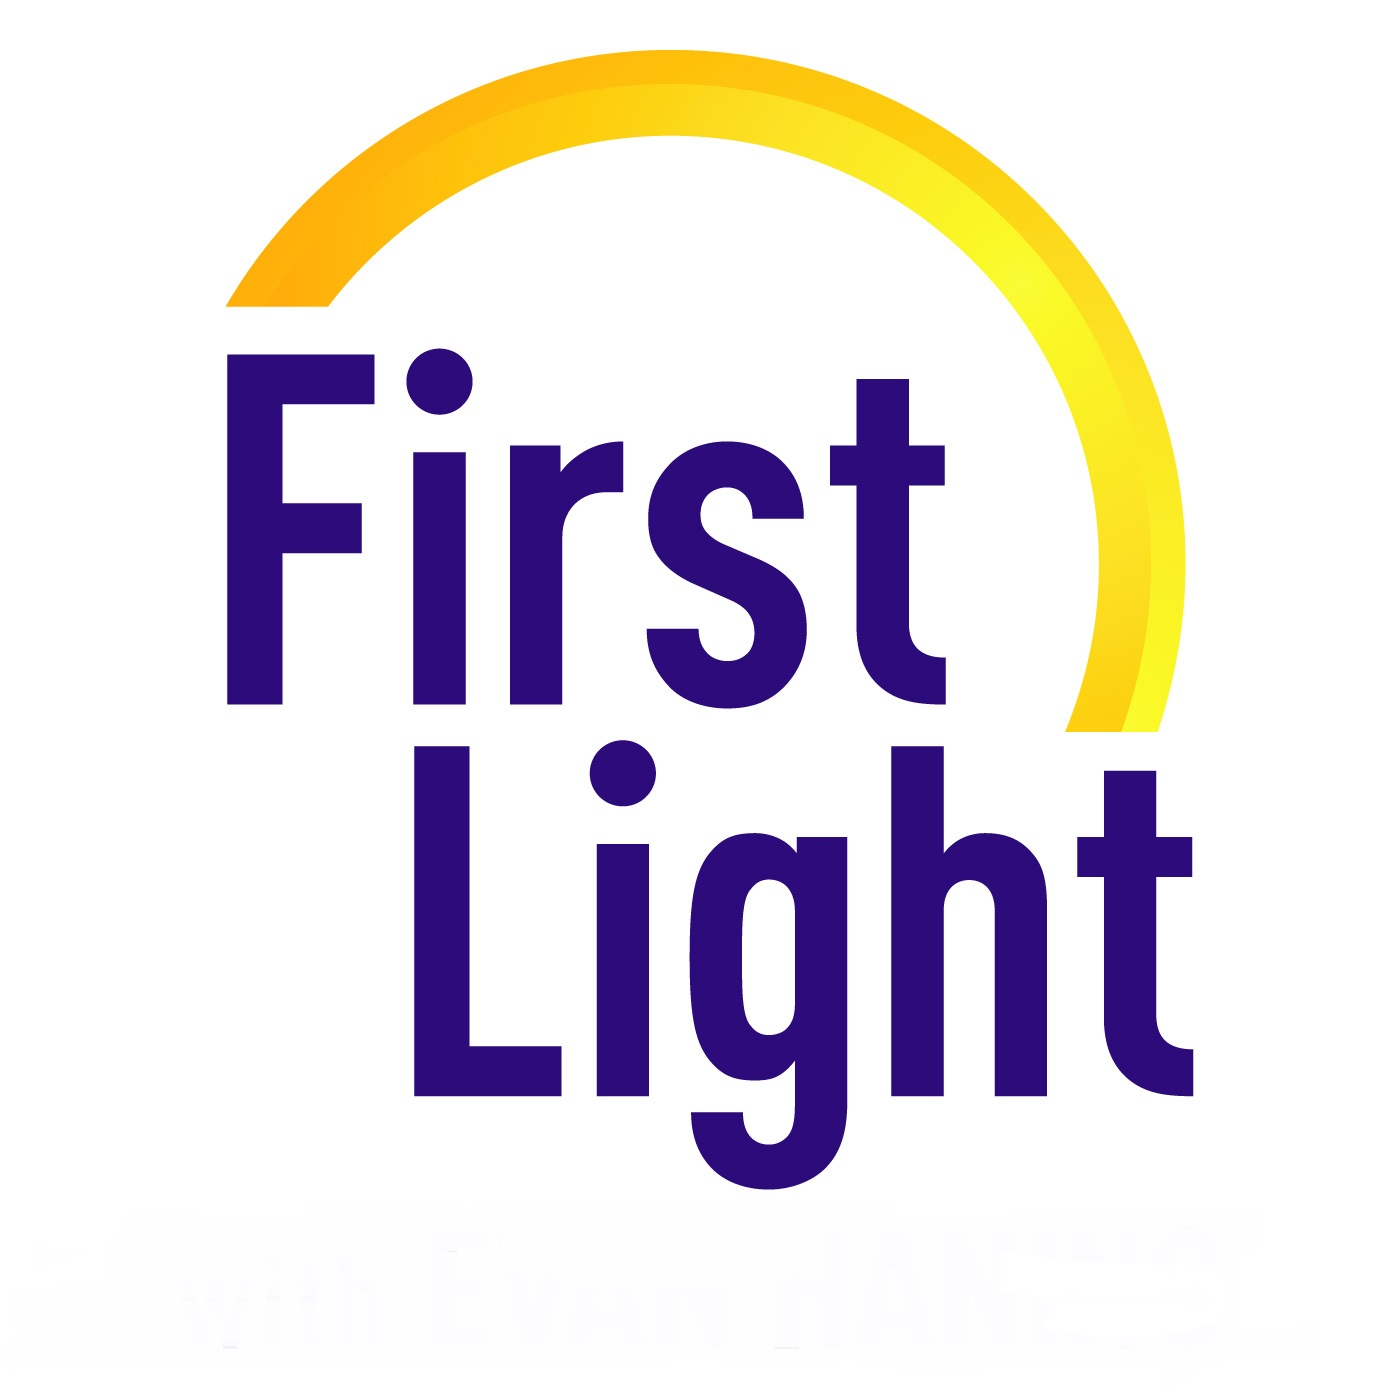 First Light - Wednesday, May 5, 2021